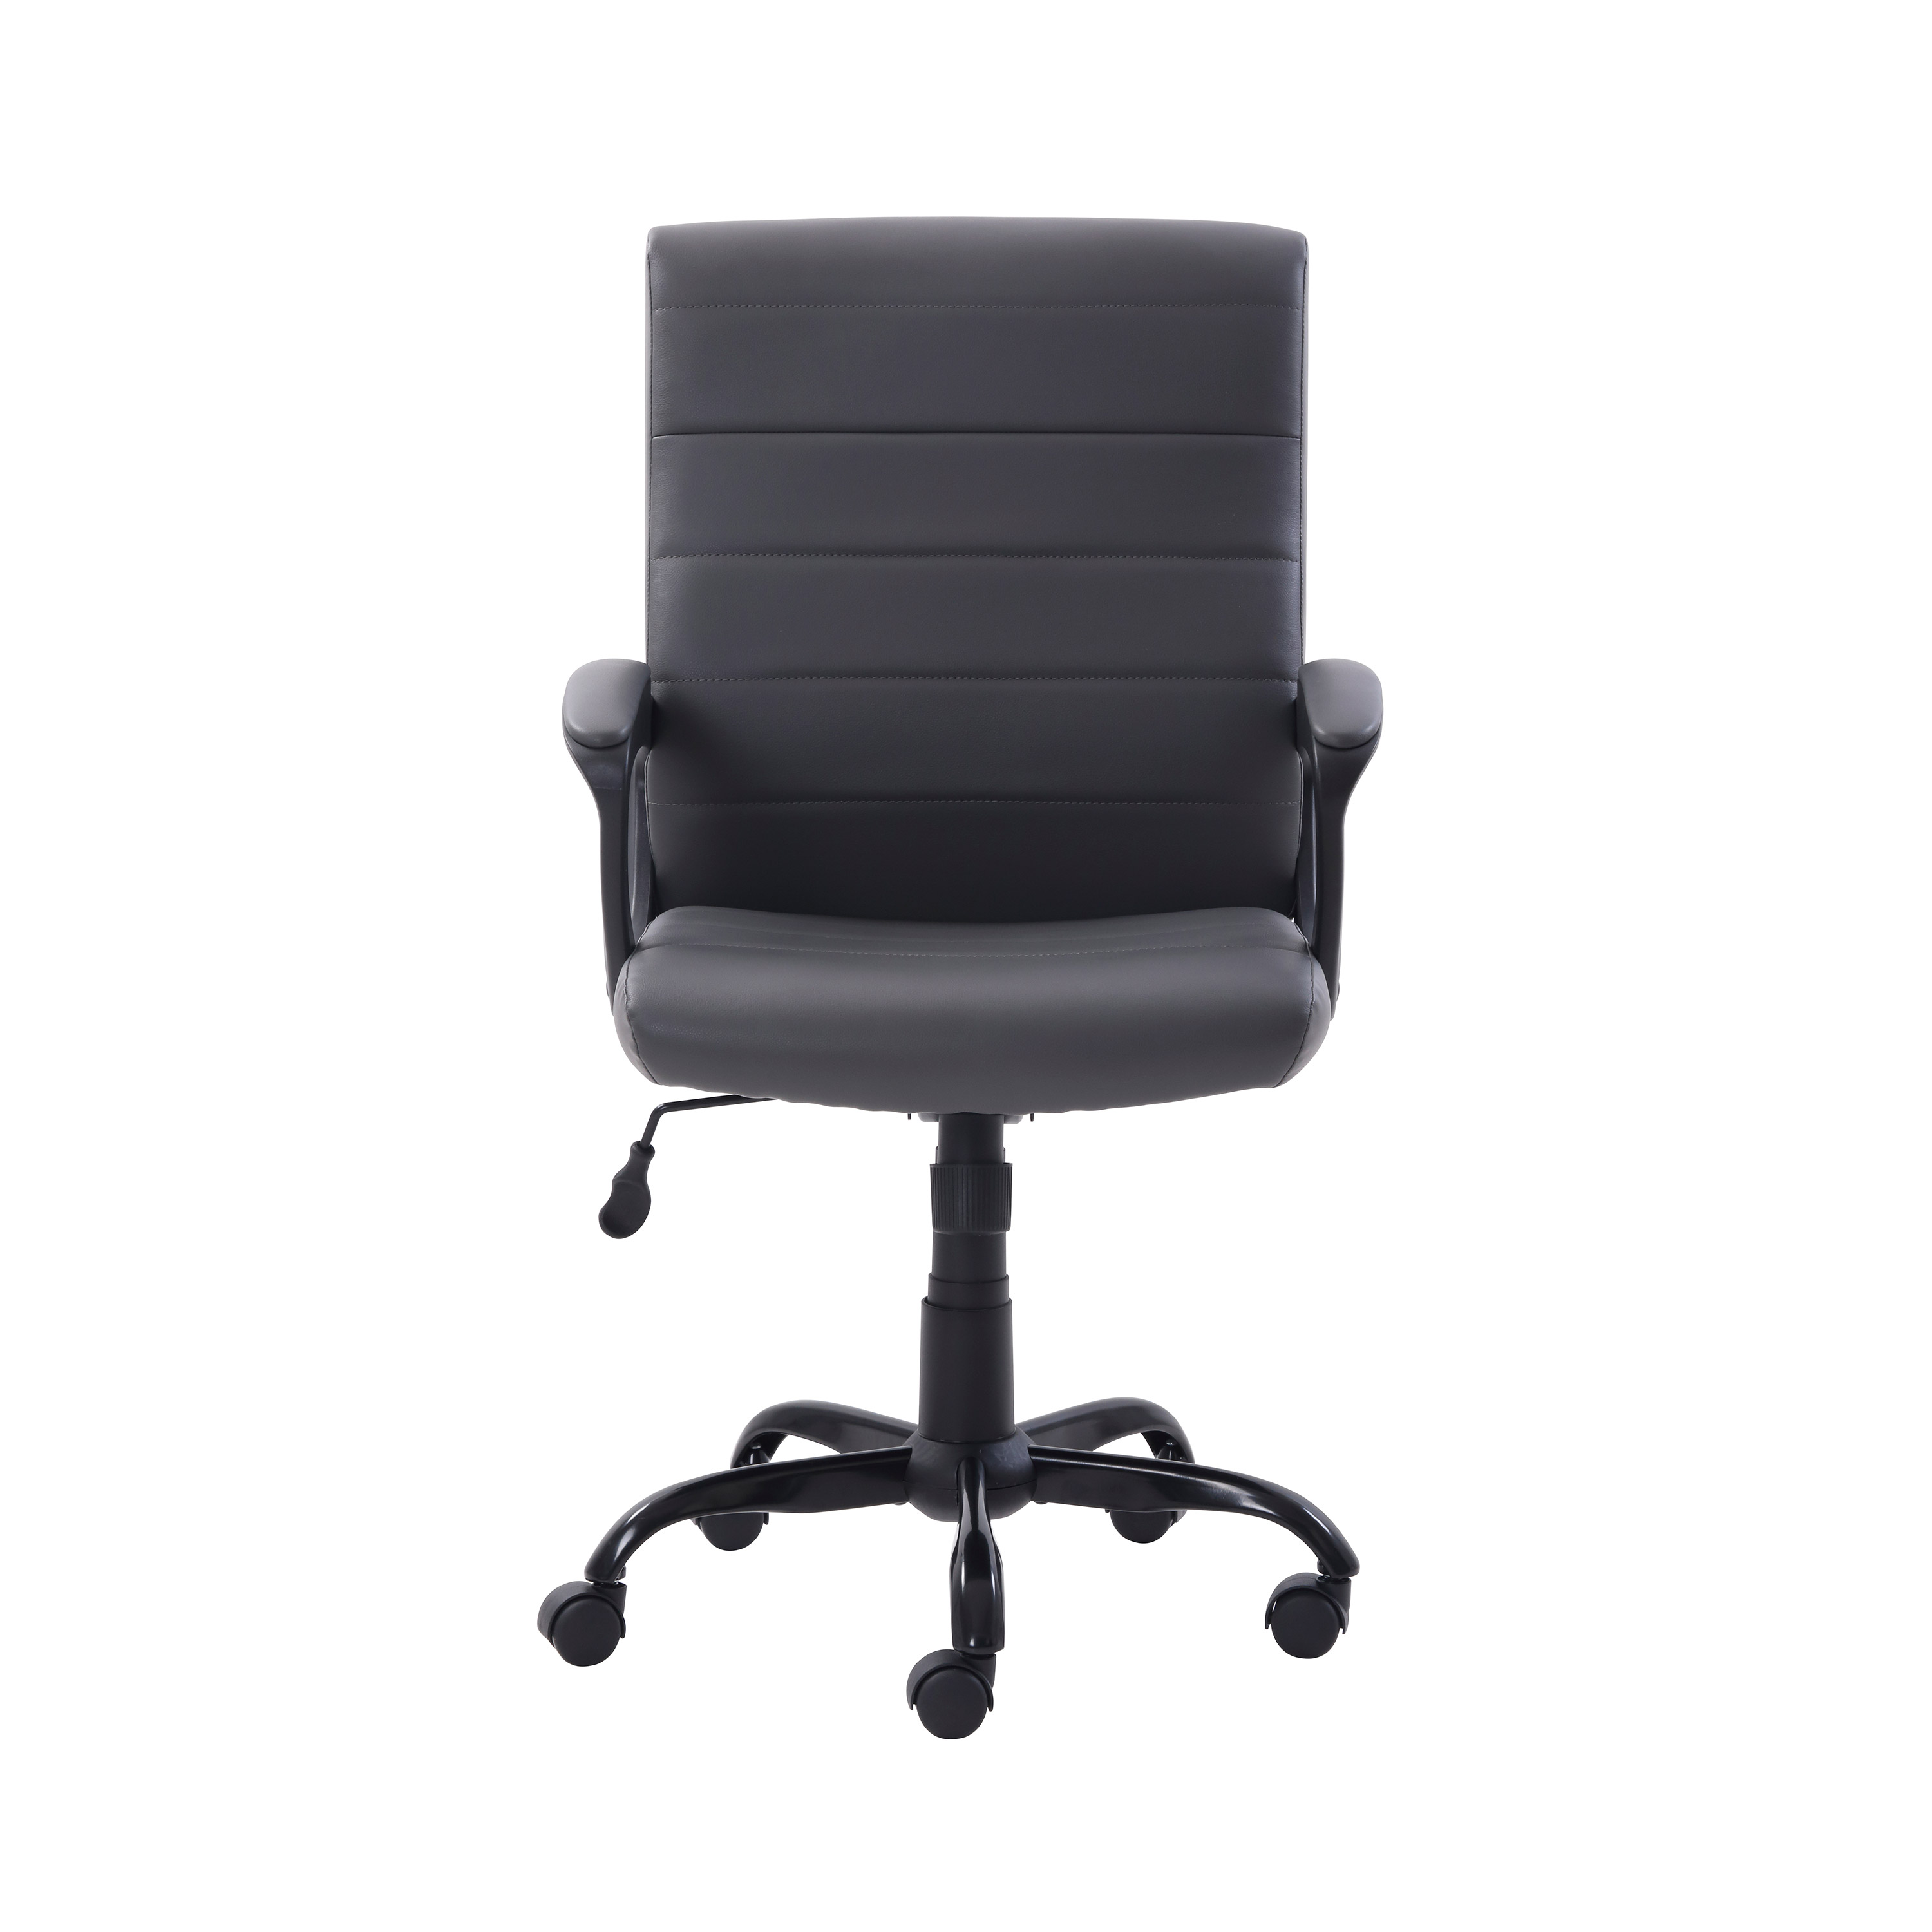 Mainstays Bonded Leather Mid-Back Manager's Office Chair, Gray - image 8 of 11